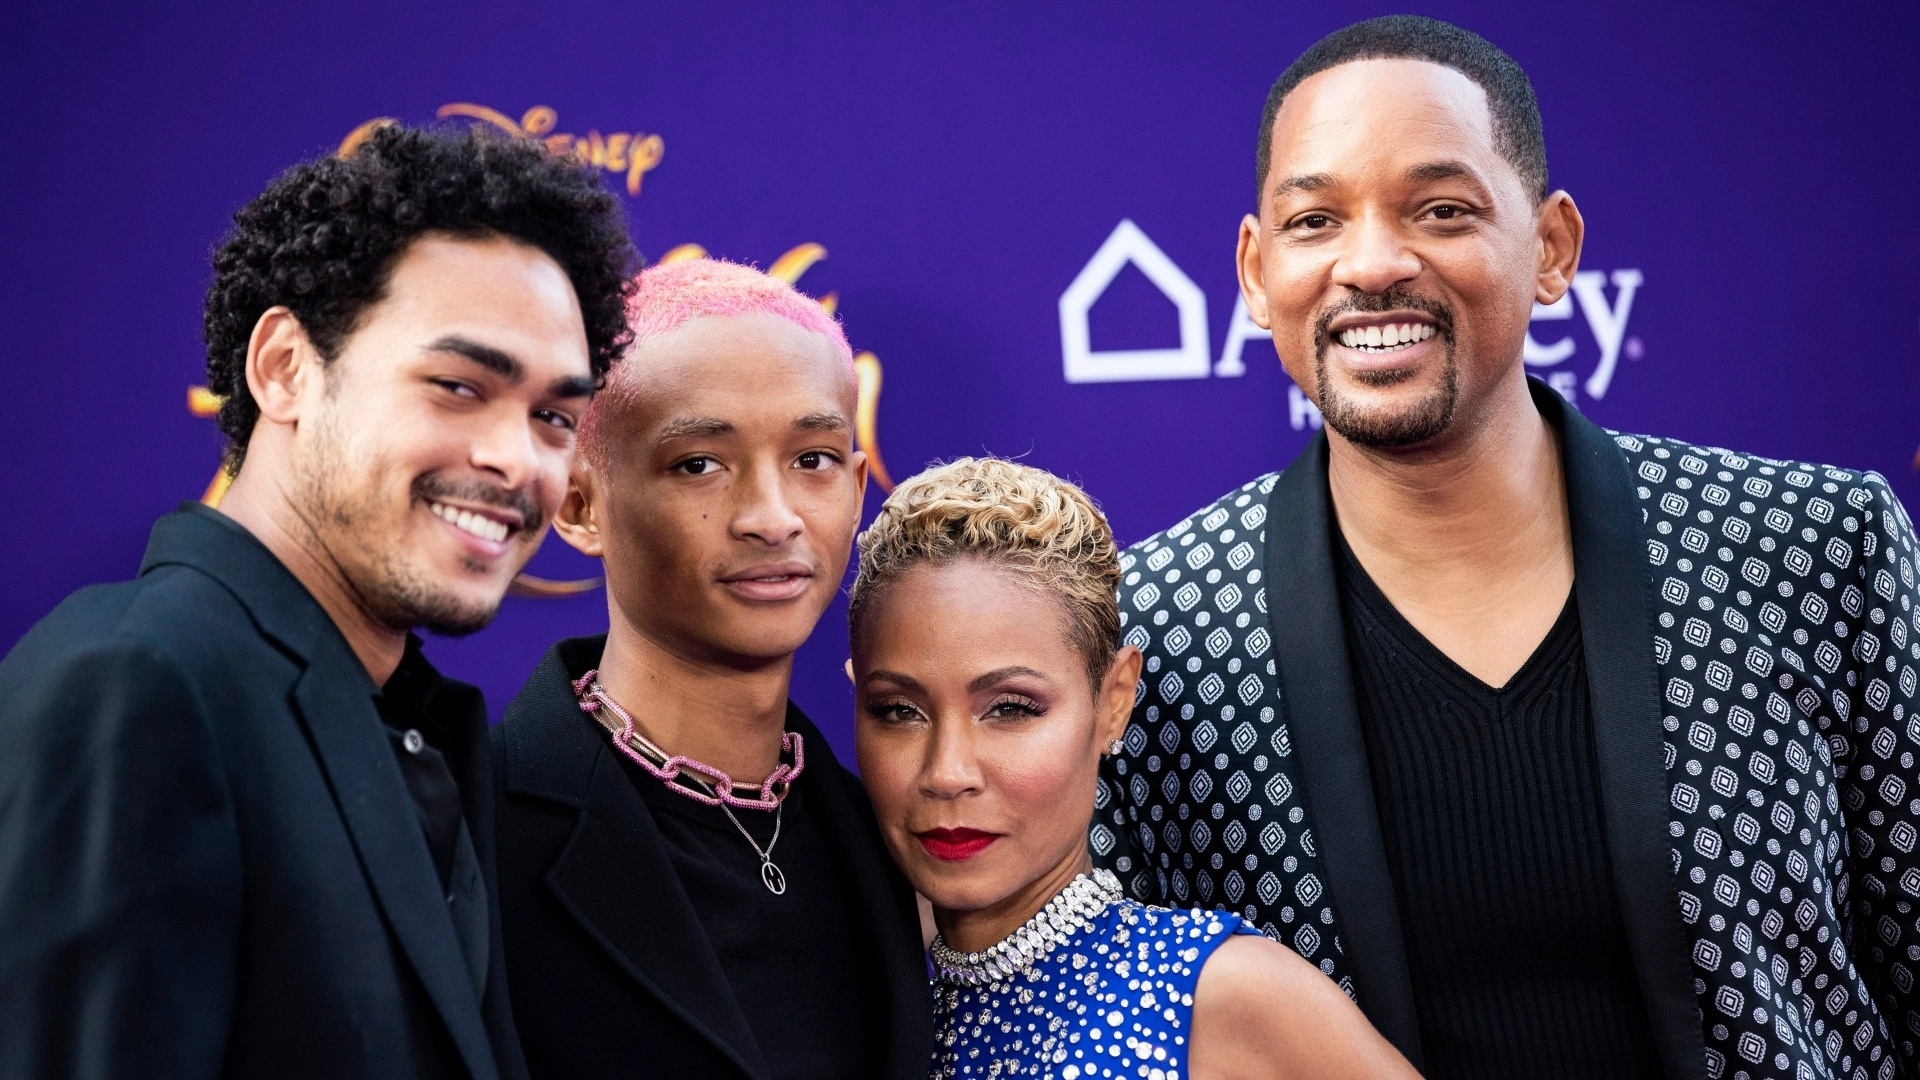 Will and Jada Pinkett Smith's intervention, Jaden's weight loss, Concerned parents, Family support, 1920x1080 Full HD Desktop